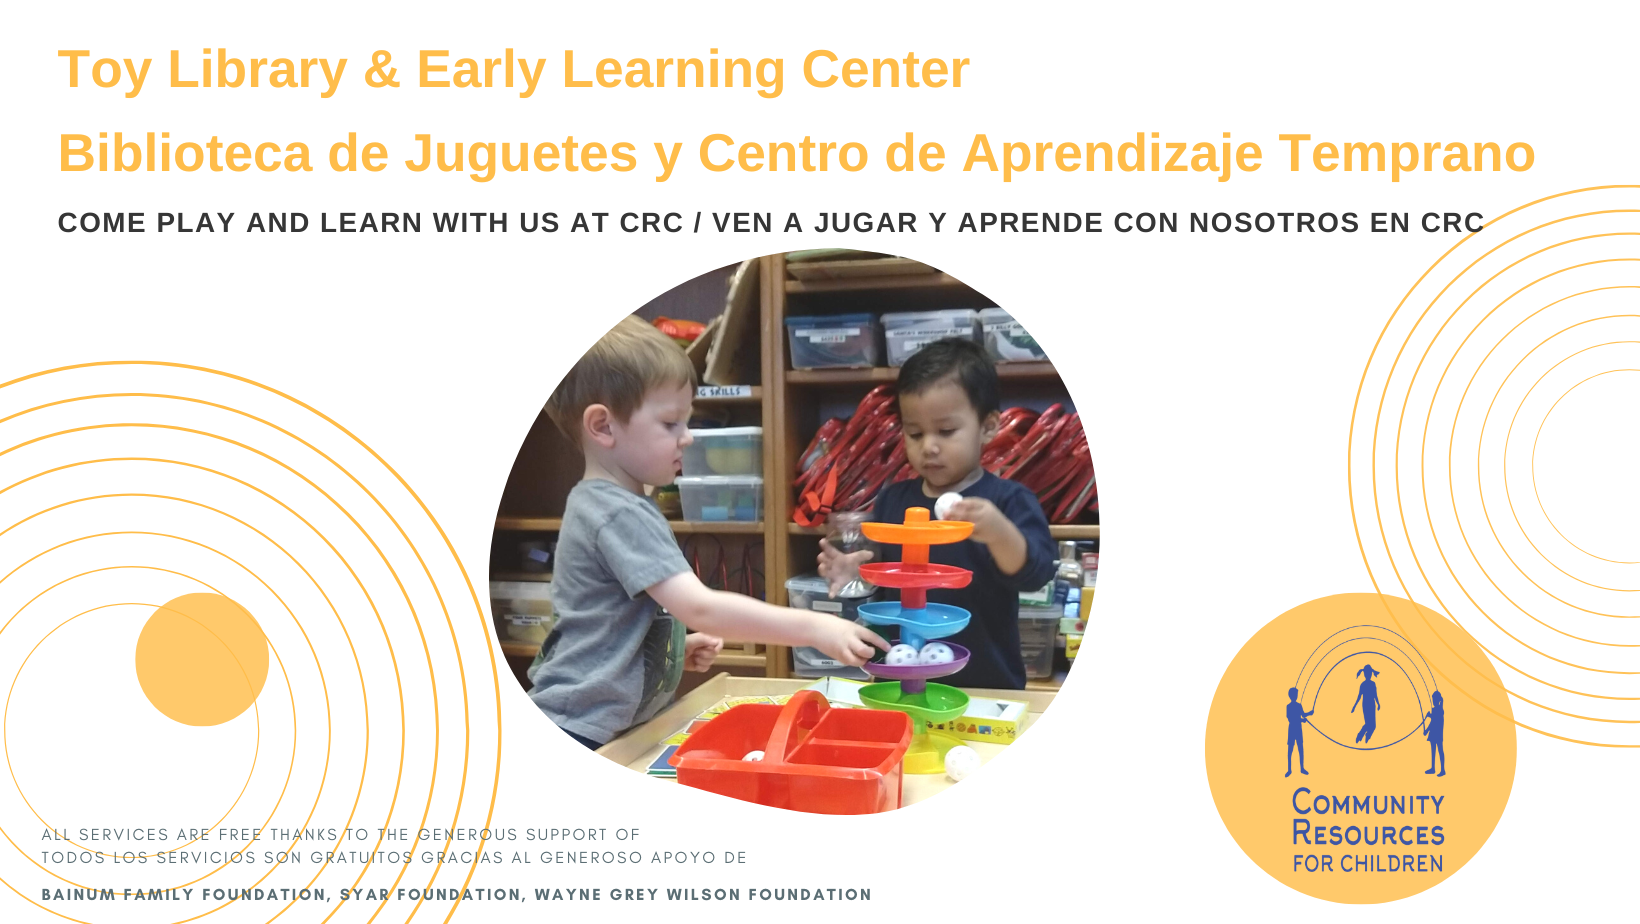 The image is promoting a Toy Library & Early Learning Center where children can come play and learn for free with the support of various foundations. Full Text: Toy Library & Early Learning Center Biblioteca de Juguetes y Centro de Aprendizaje Temprano COME PLAY AND LEARN WITH US AT CRC / VEN A JUGAR Y APRENDE NOSOTROS EN CRC COMMUNITY ALL SERVICES ARE FREE THANKS TO THE GENEROUS SUPPORT OF RESOURCES TODOS LOS SERVICIOS SON GRATUITOS GRACIAS AL GENEROSO APOYO DE FOR CHILDREN BAINUM FAMILY FOUNDATION, SYAR FOUNDATION, WAYNE GREY WILSON FOUNDATION